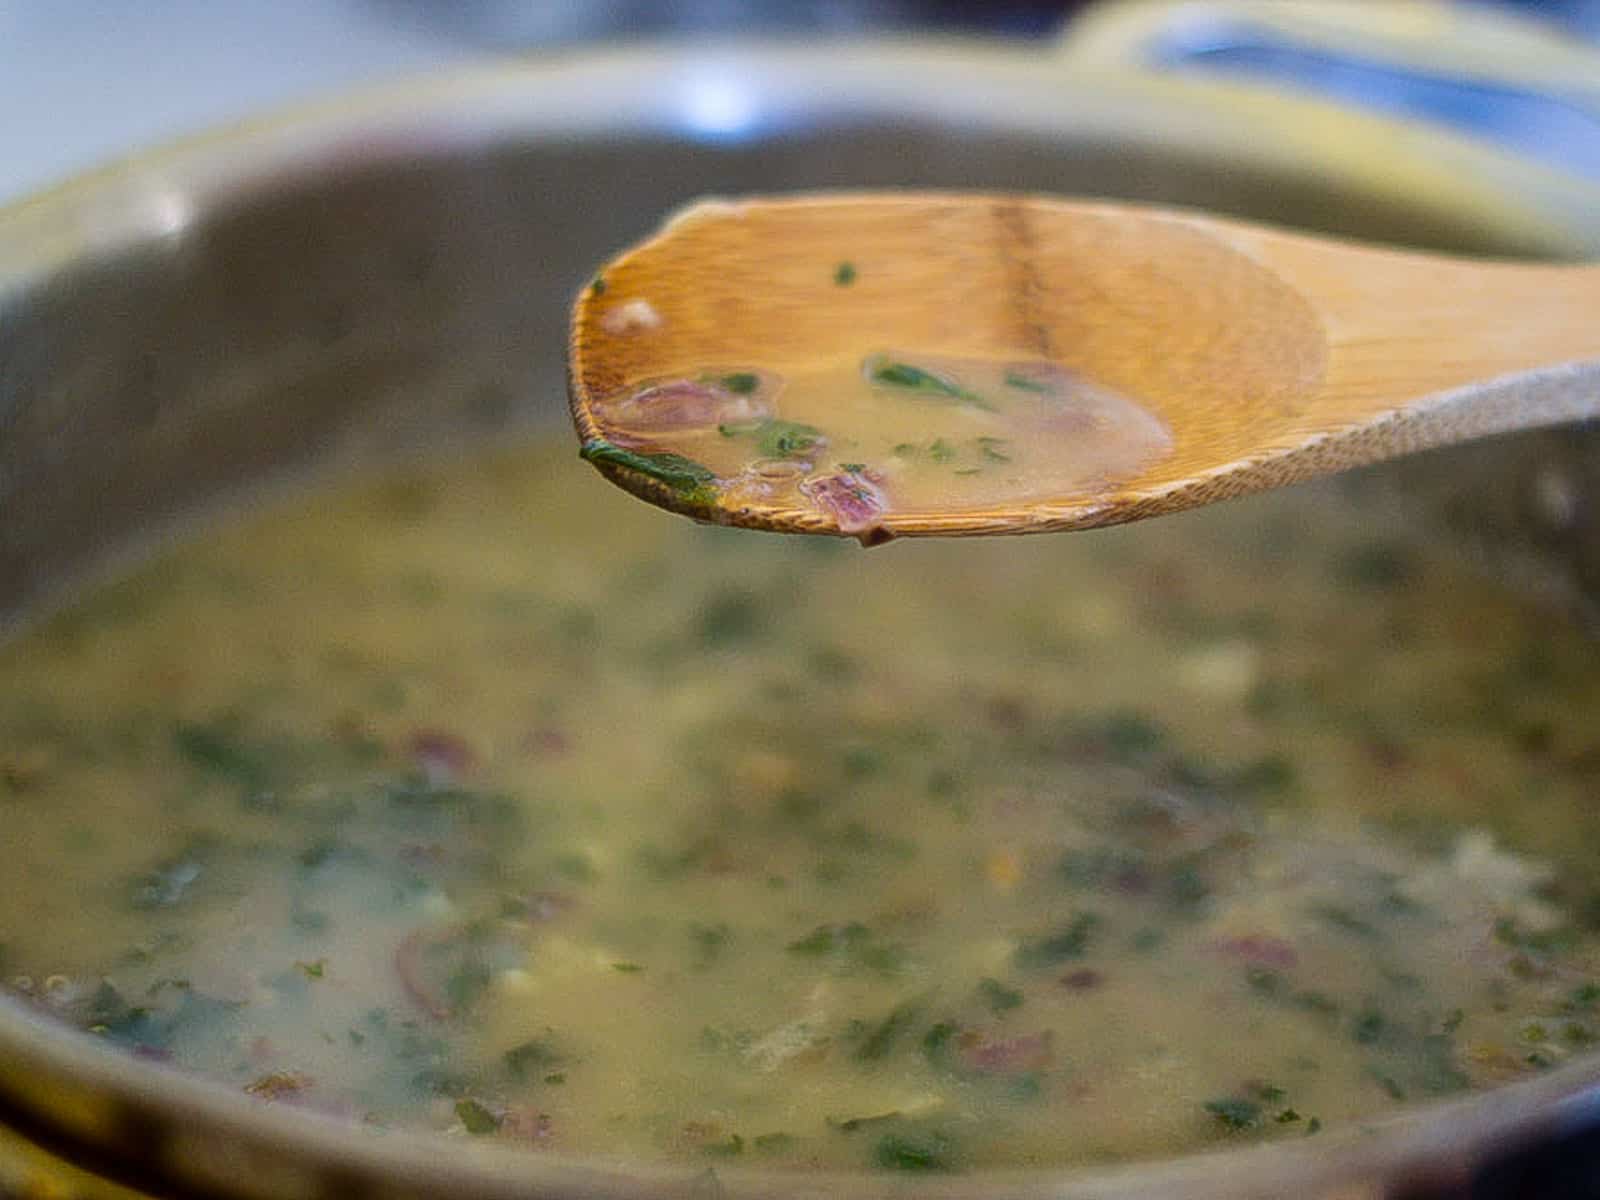 Simmer the green sauce until slightly thickened.